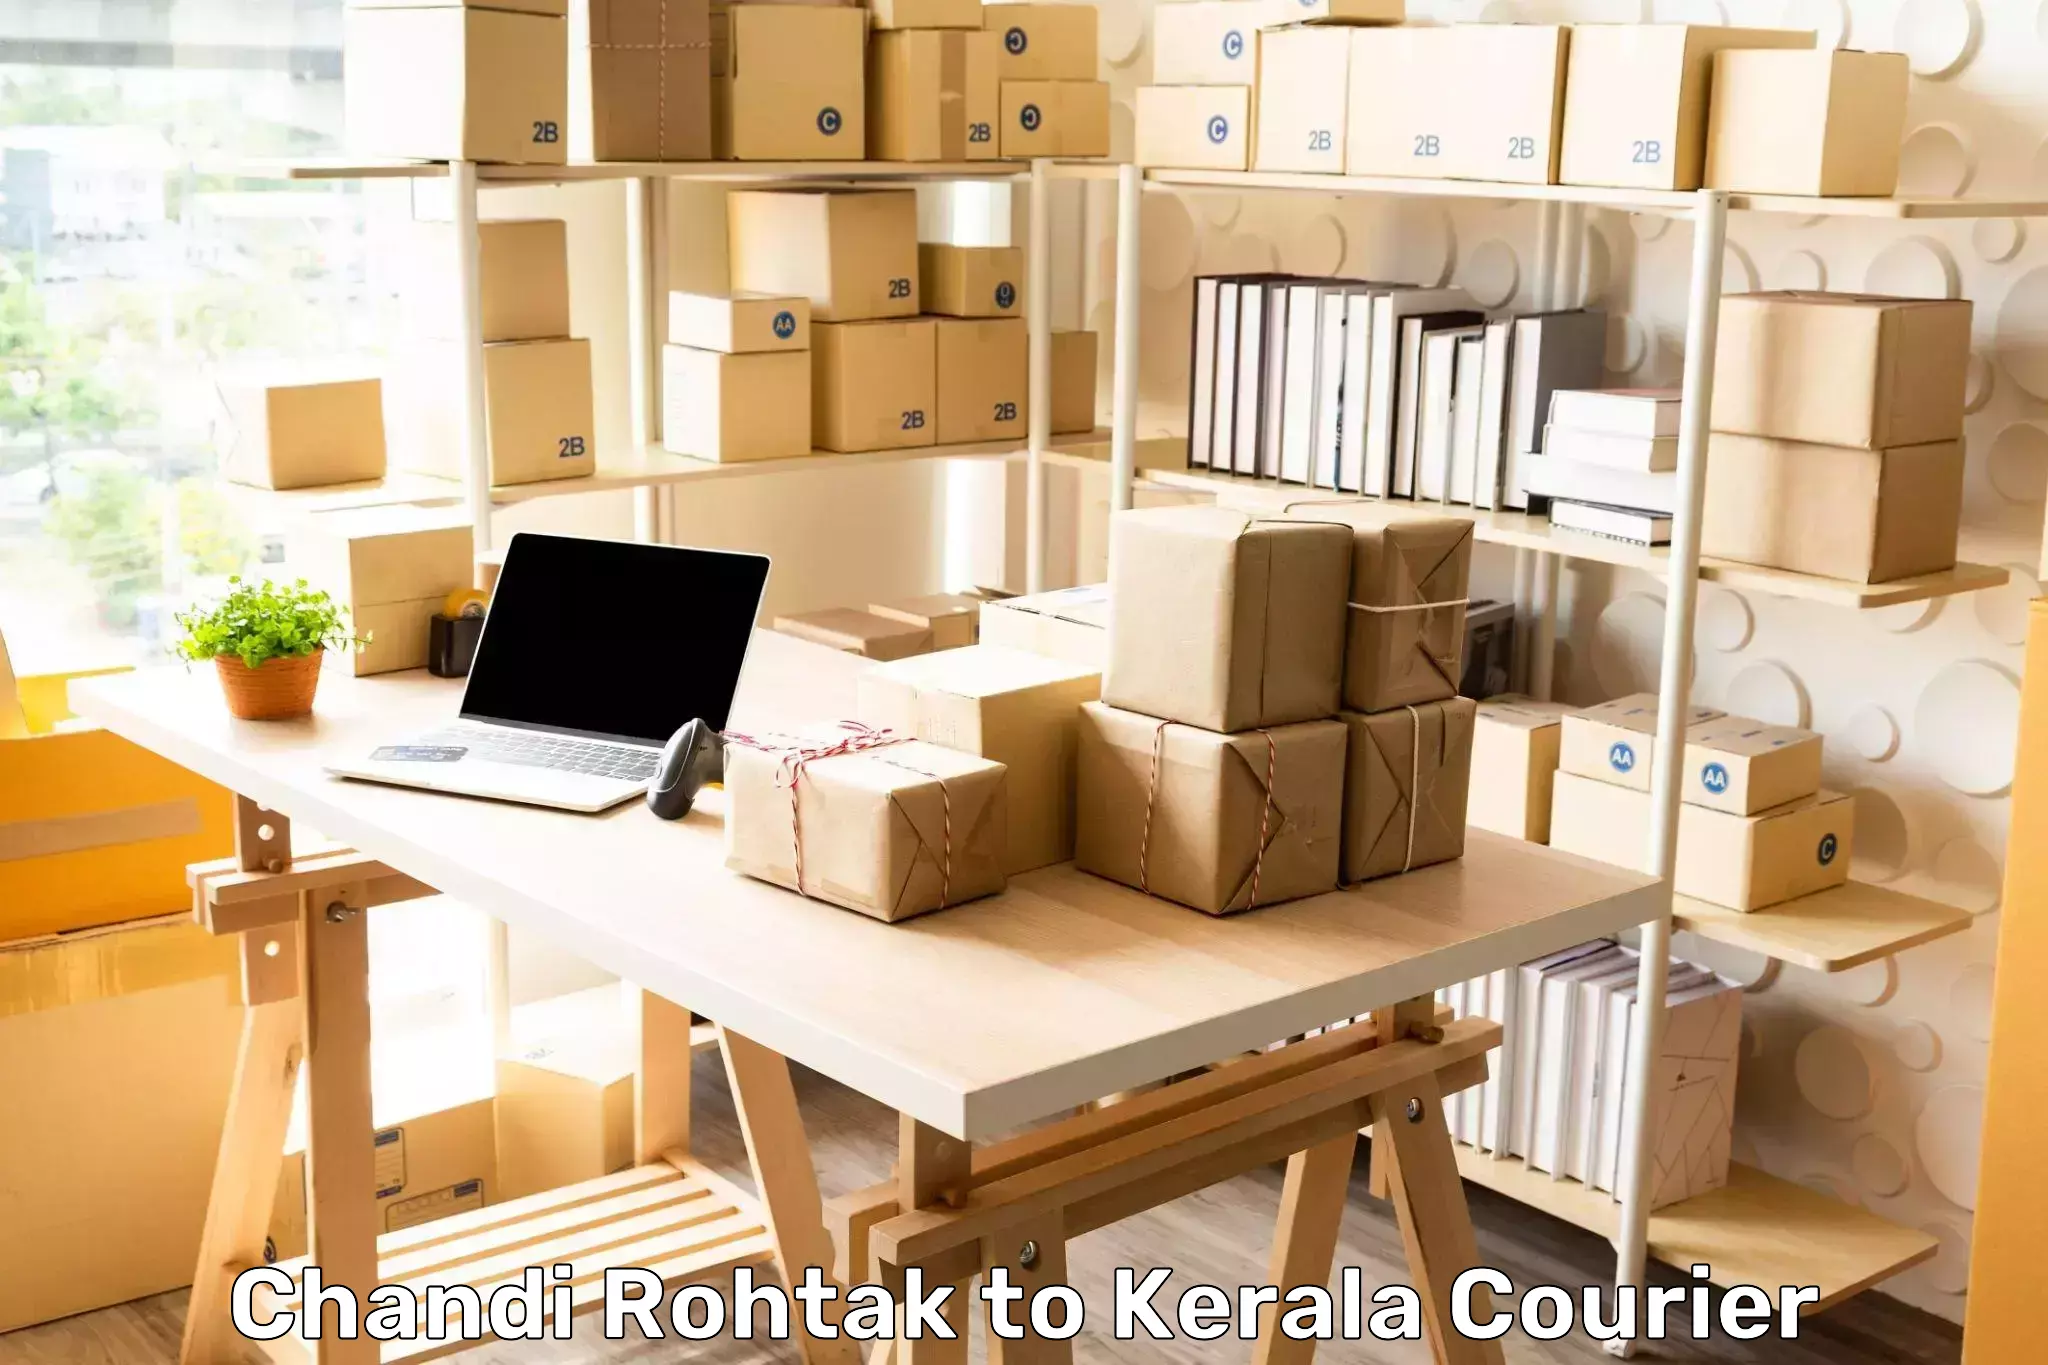 Round-the-clock parcel delivery in Chandi Rohtak to Kakkayam